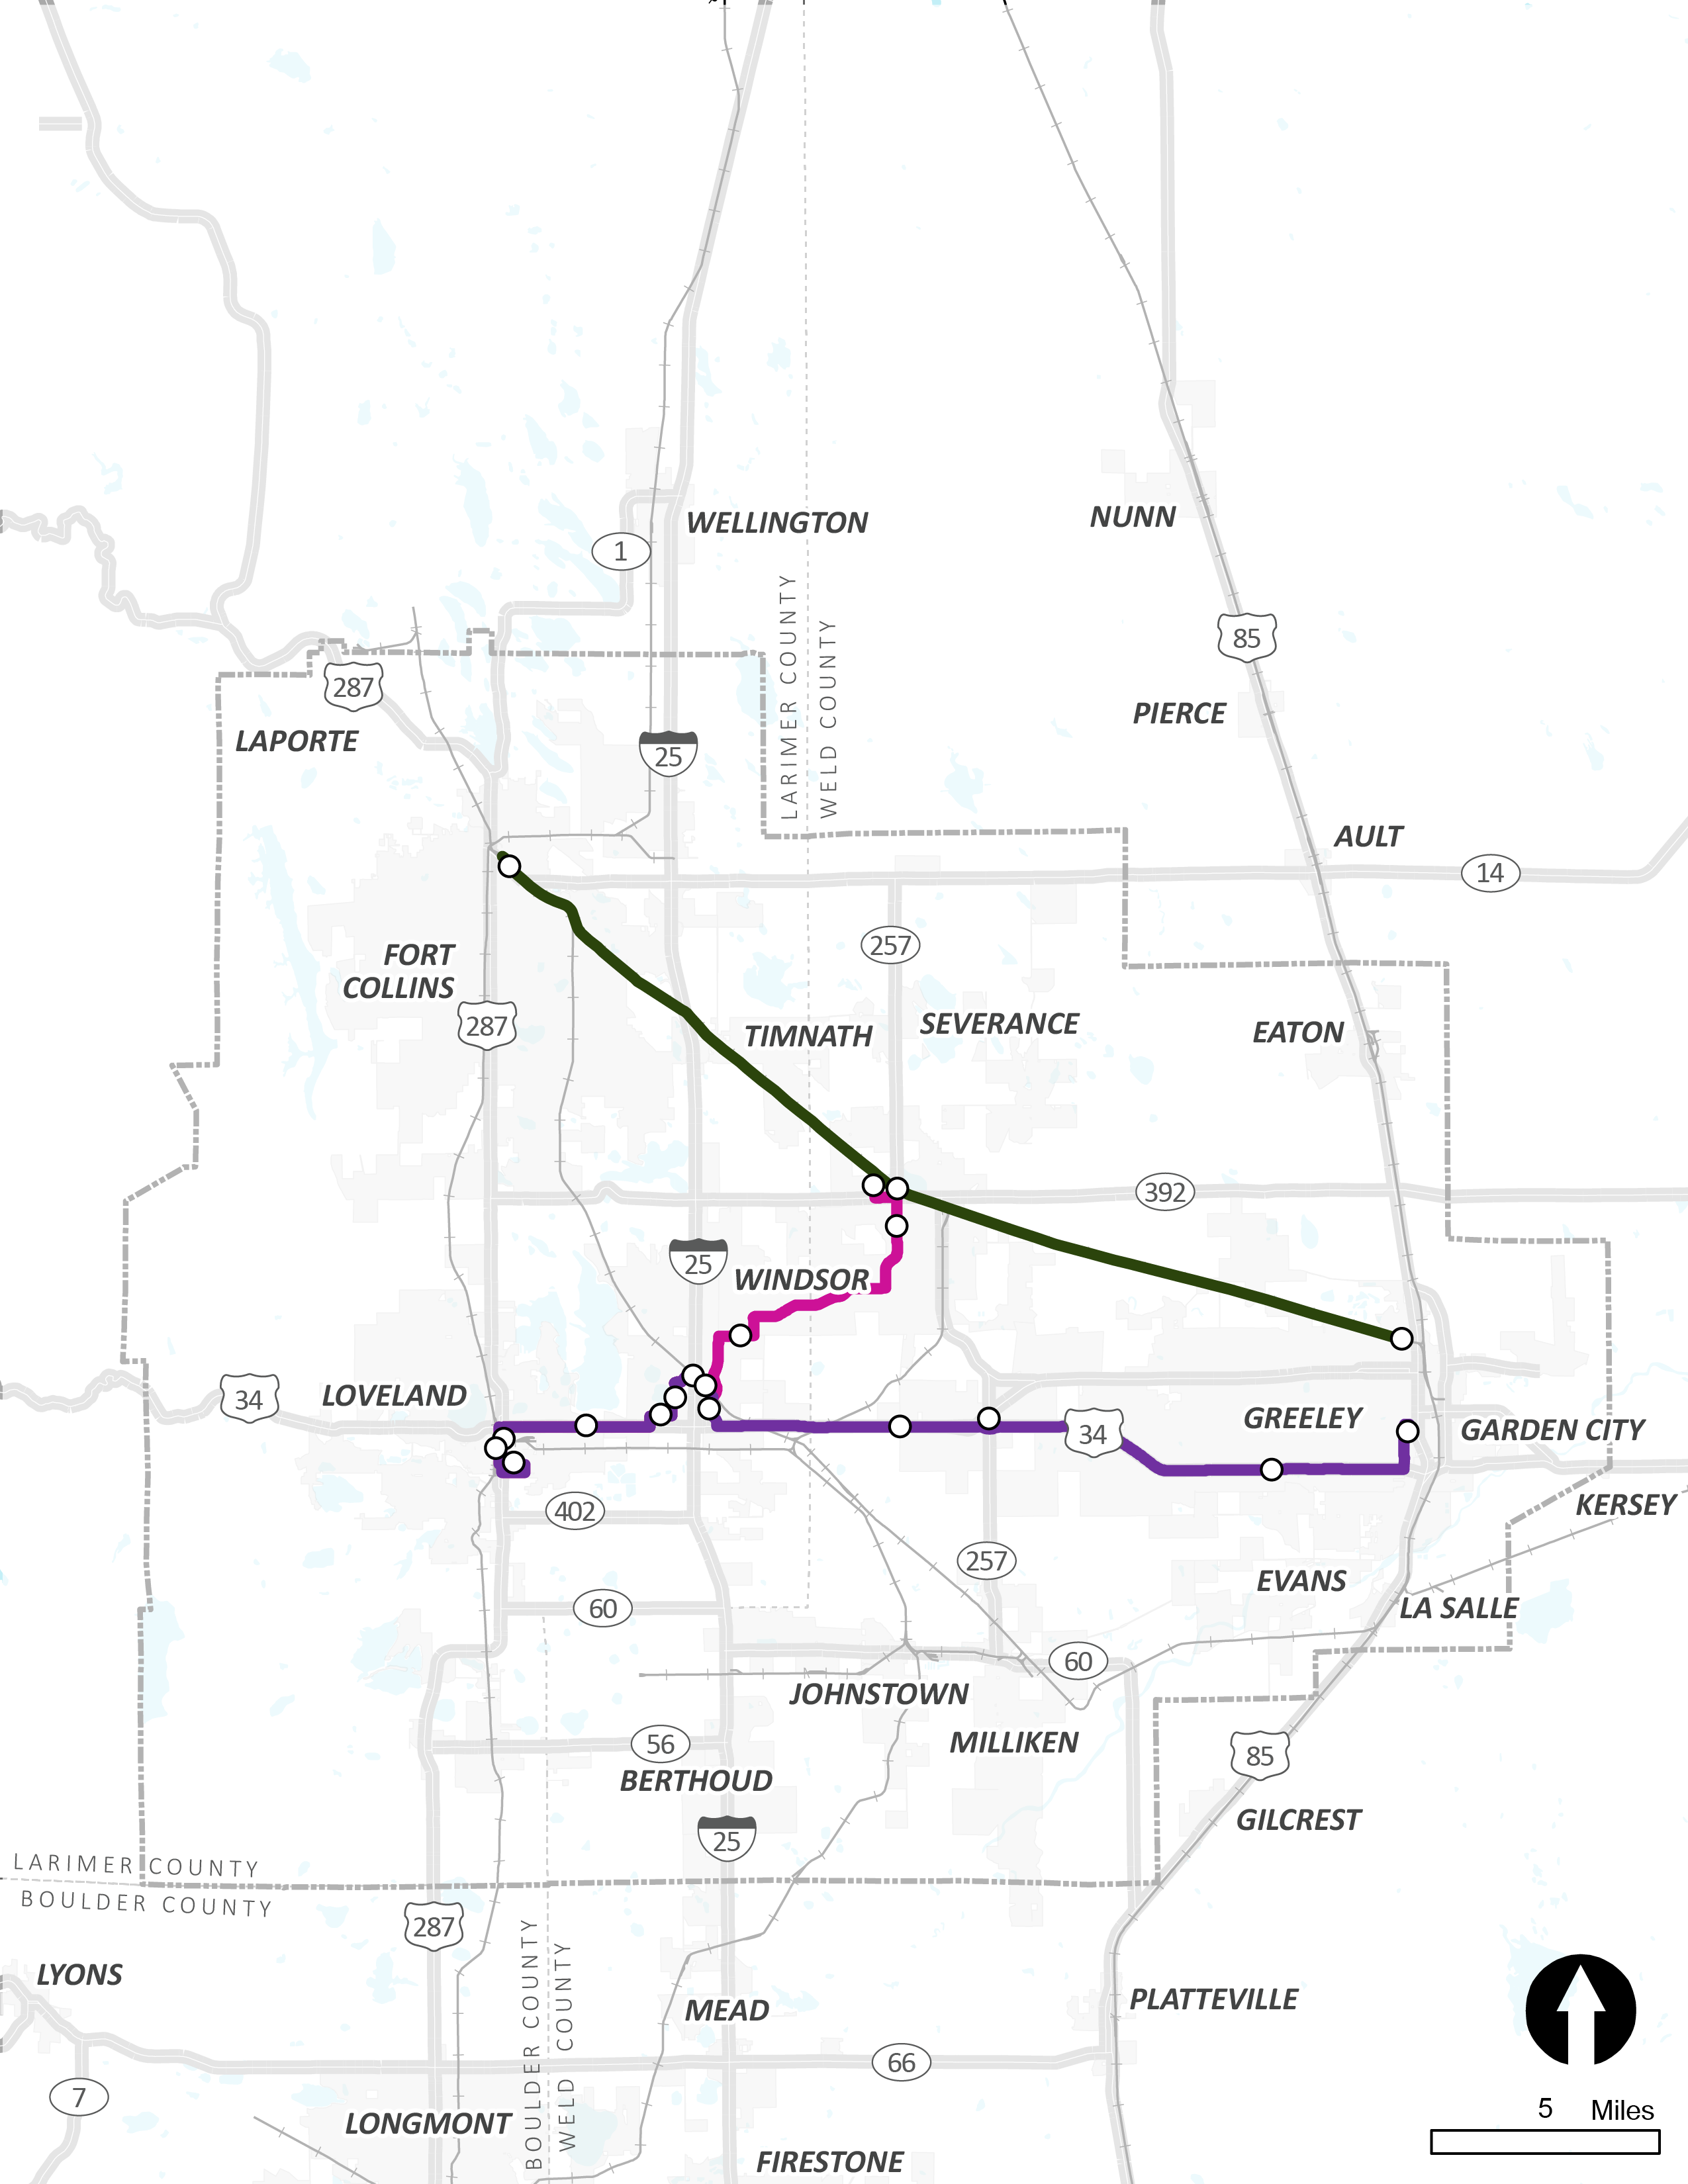 Proposed transit corridors on US34, Loveland to Windsor, and Fort Collins to Greeley